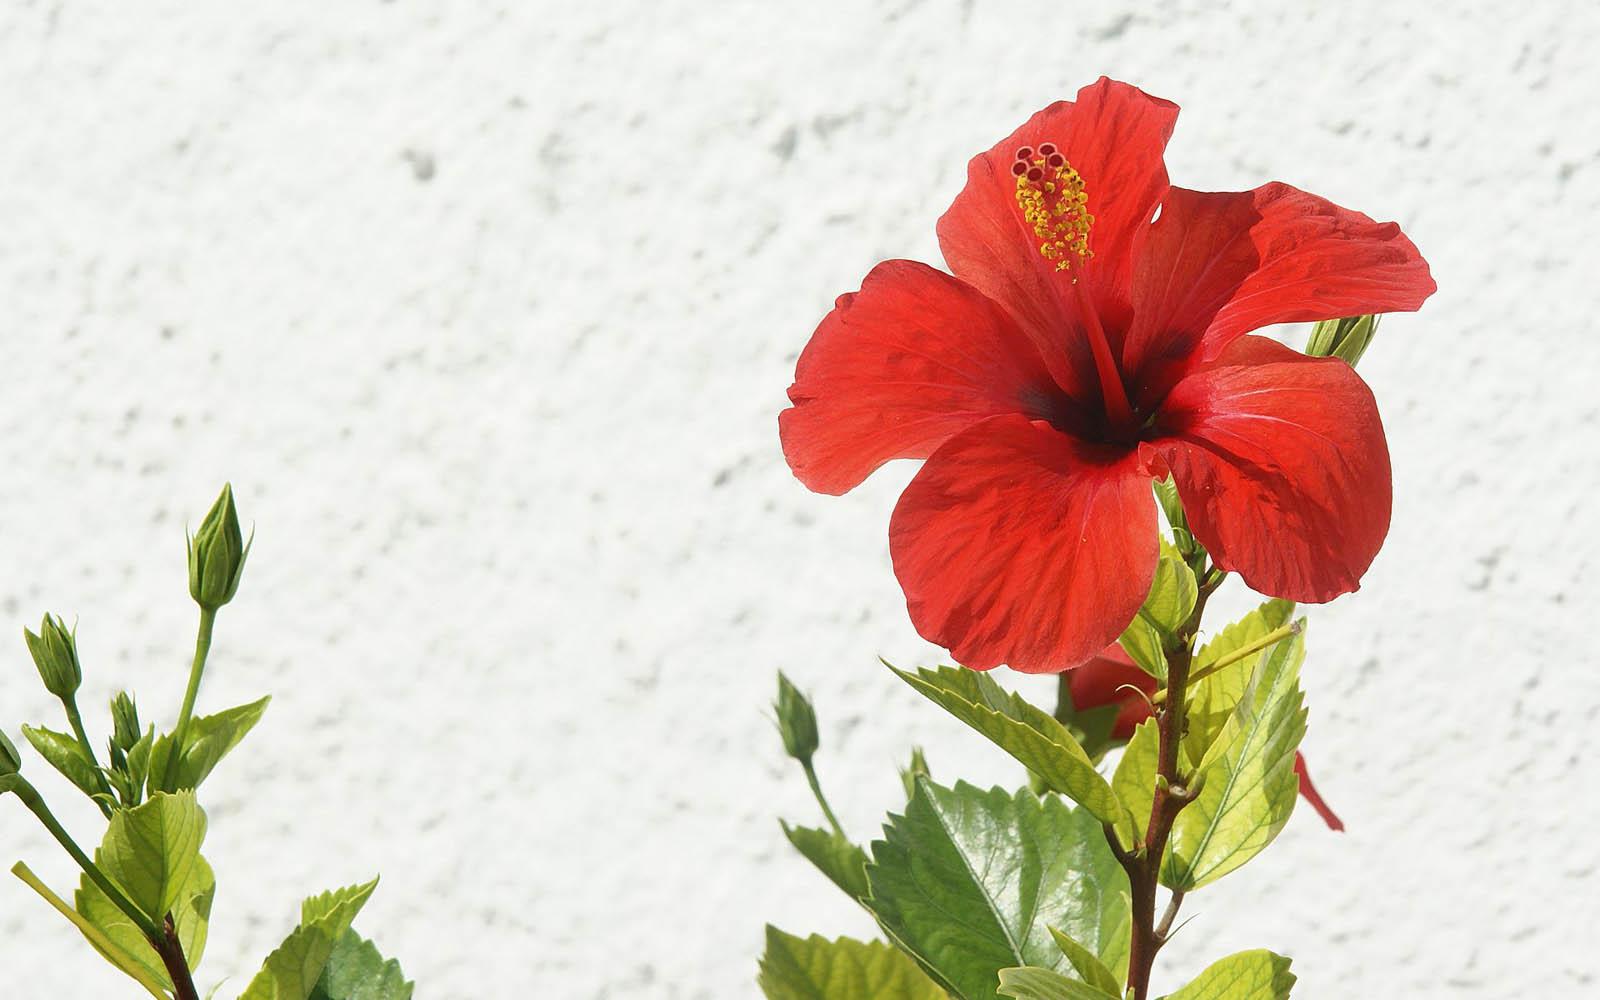 Fresh Red Hibiscus Flower Image. Top Collection of different